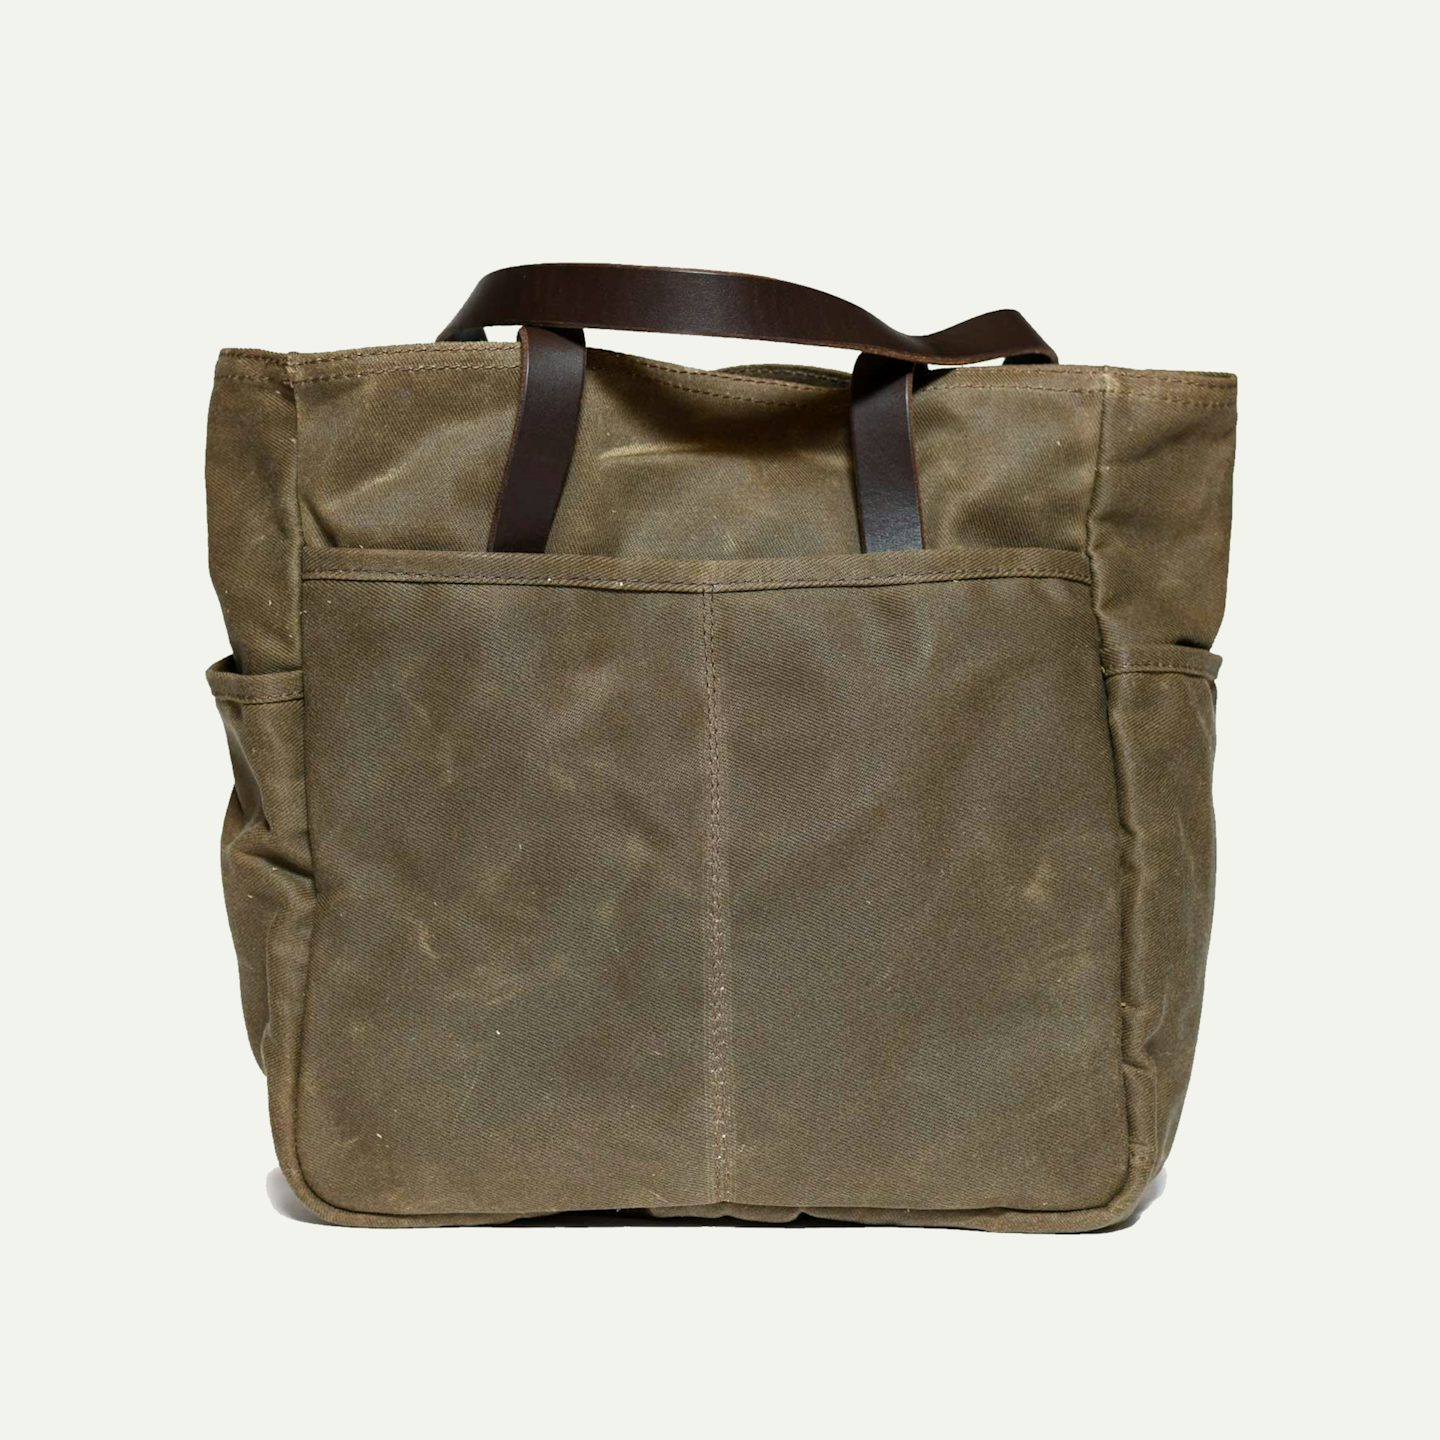 Simple Tote - Utility Tan (Waxed Canvas)